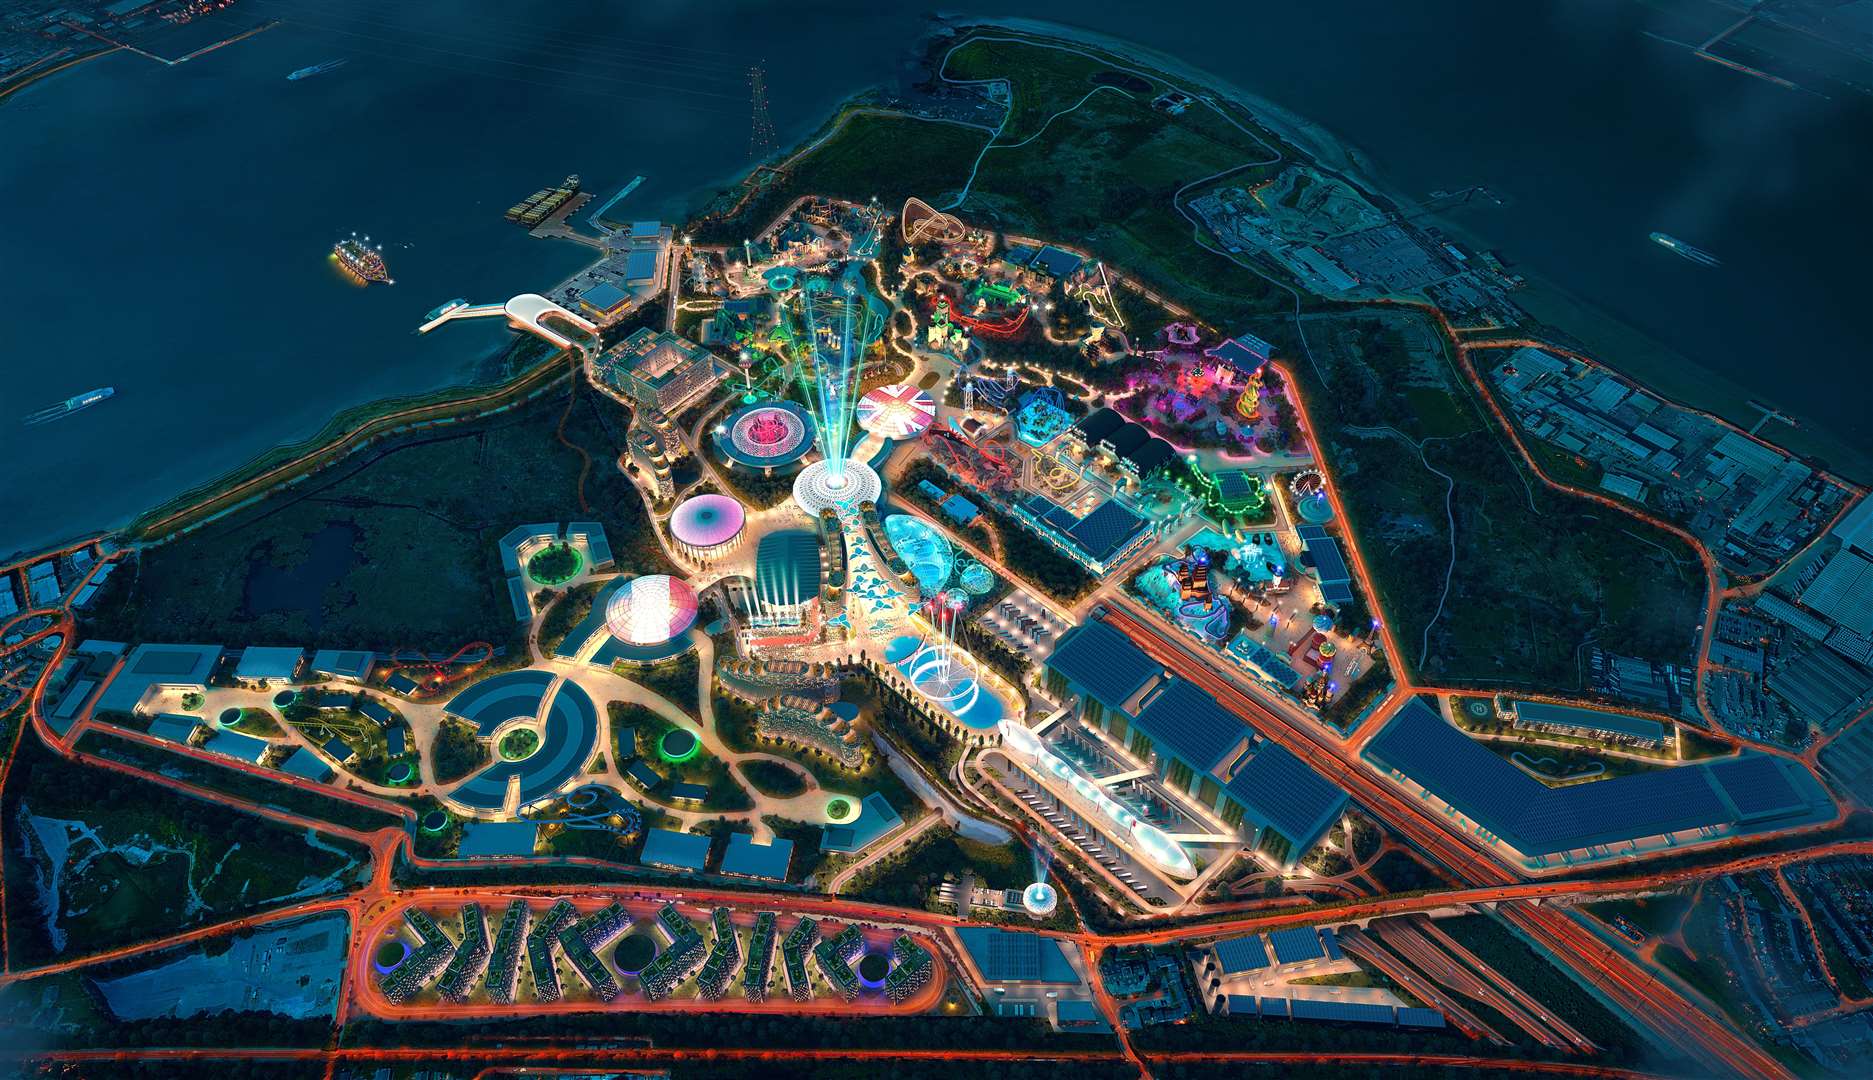 A new aerial night time image of the London Resort theme park project was released this month. Photo: London Resort